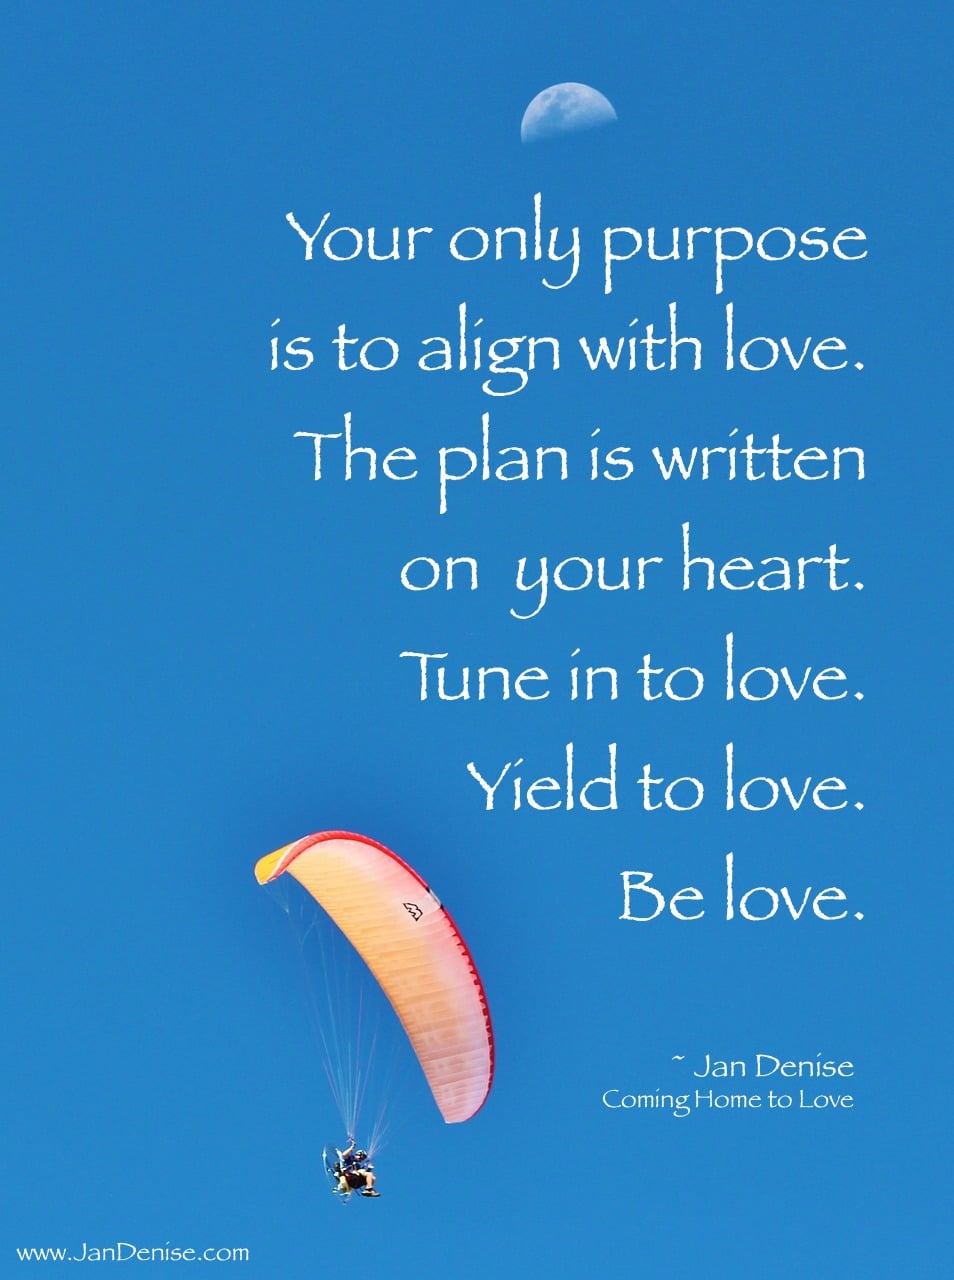 You have what you need to fulfill your purpose …